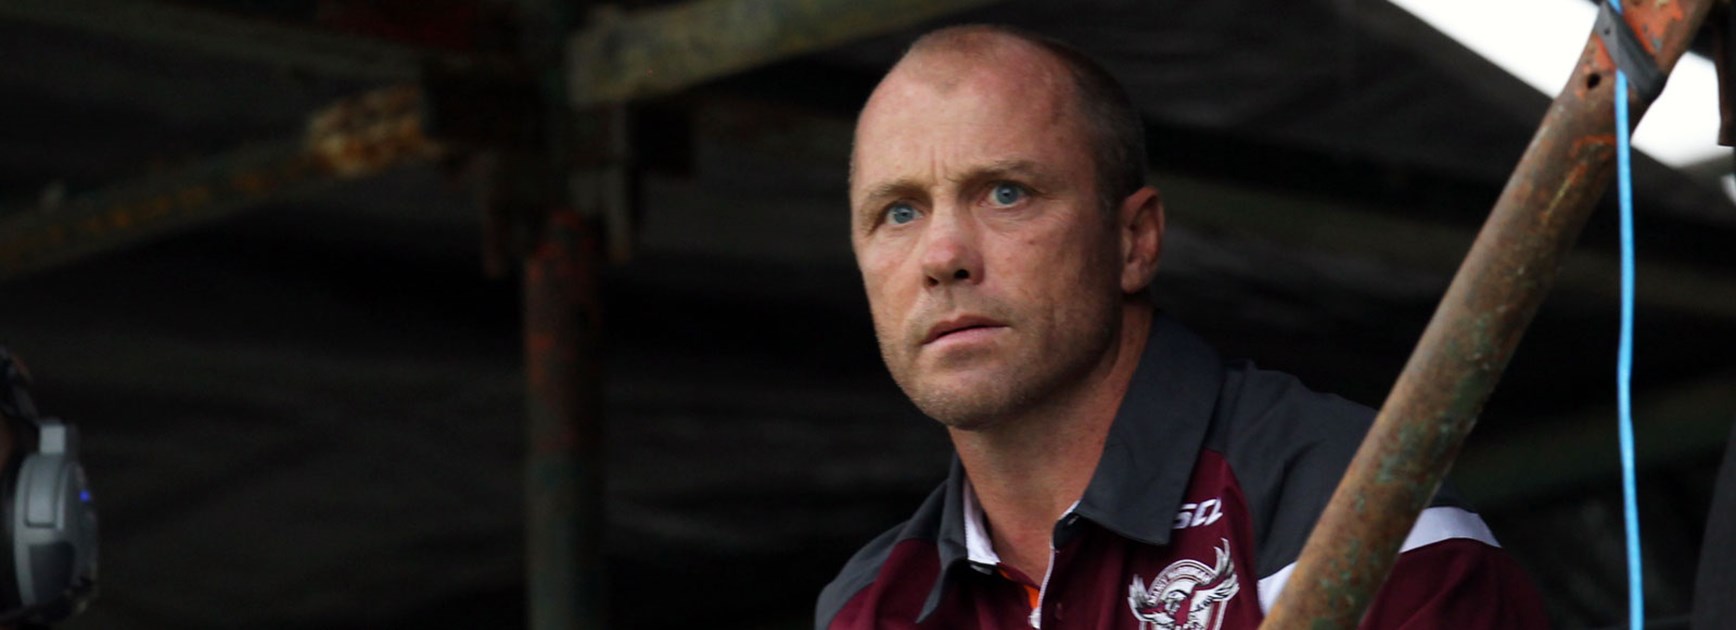 Sea Eagles coach Geoff Toovey will take heart in his side's good record in Monday night fixtures.